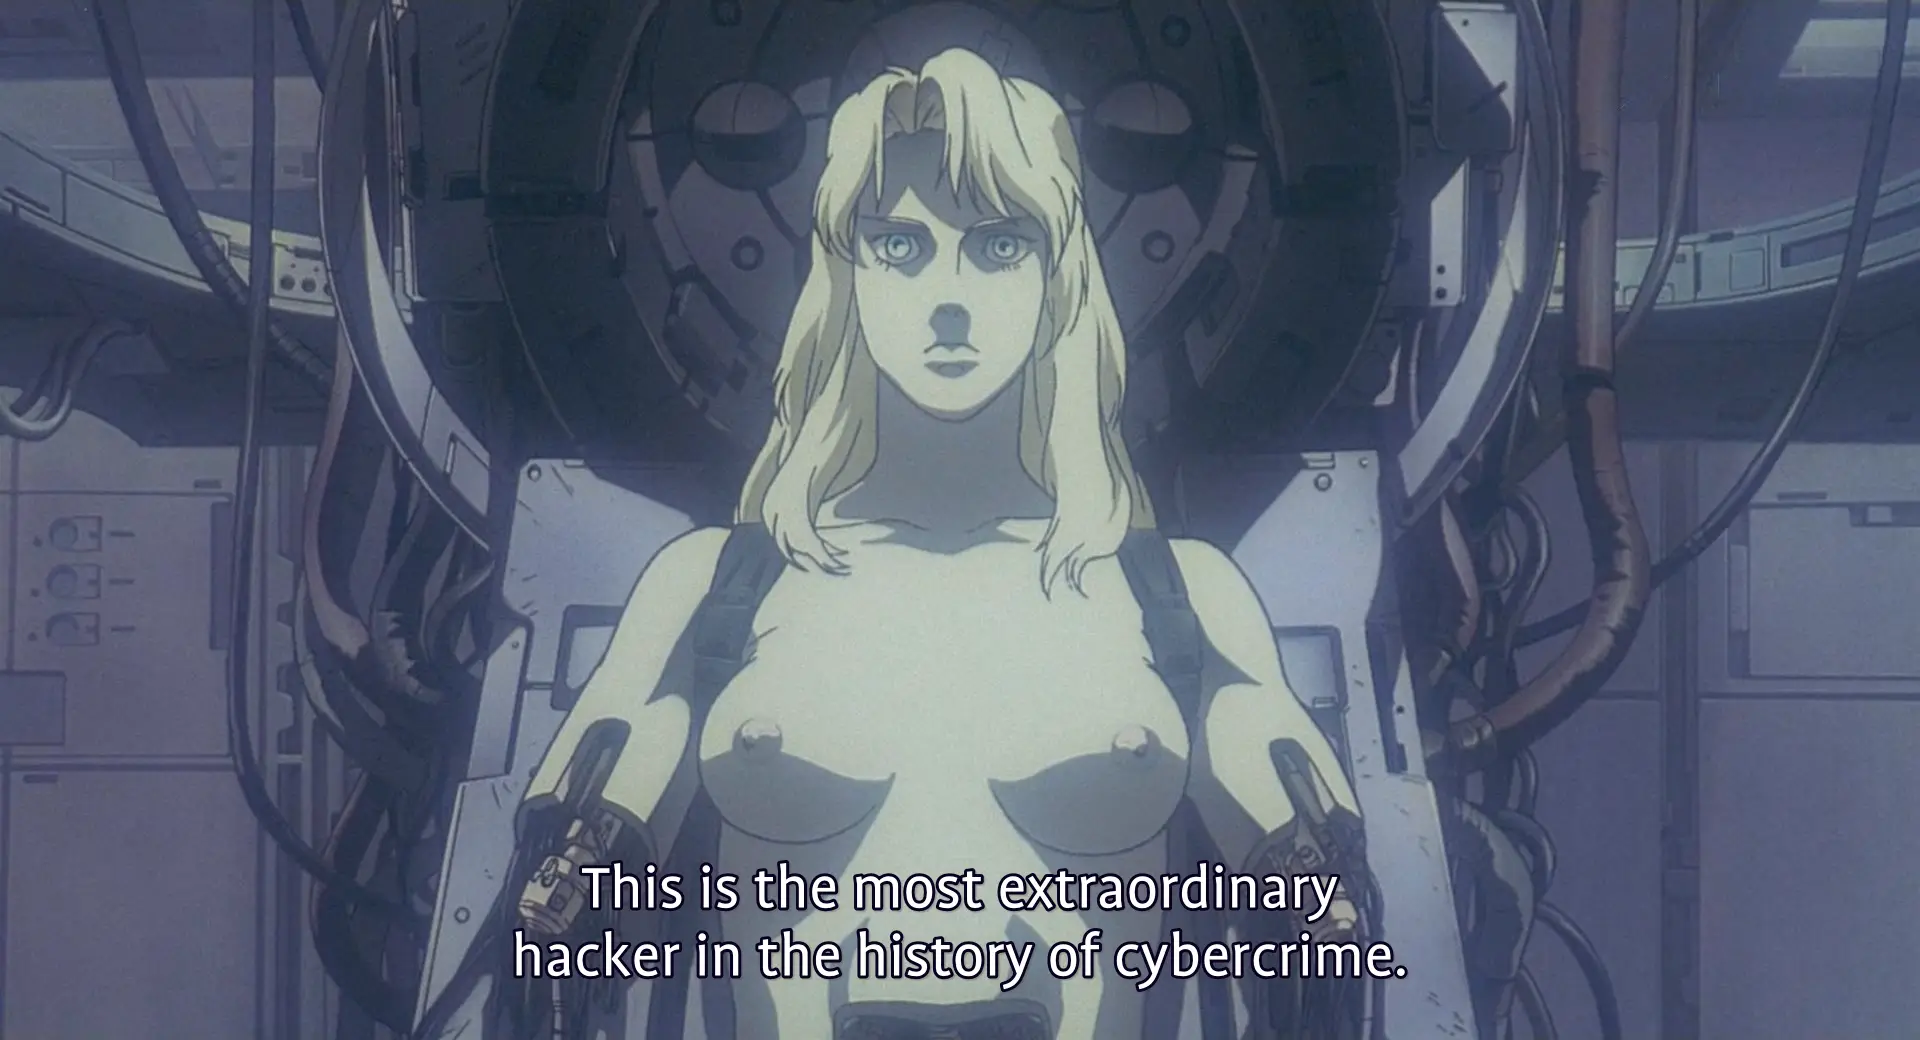 Still from GitS. The Puppet Master's constructed body is placed naked in an experiment rig with arms and lower torso removed. Her expression is neutral. A goverment minister is saying 'This is the most extraordinary hacker in the history of cybercrime'.